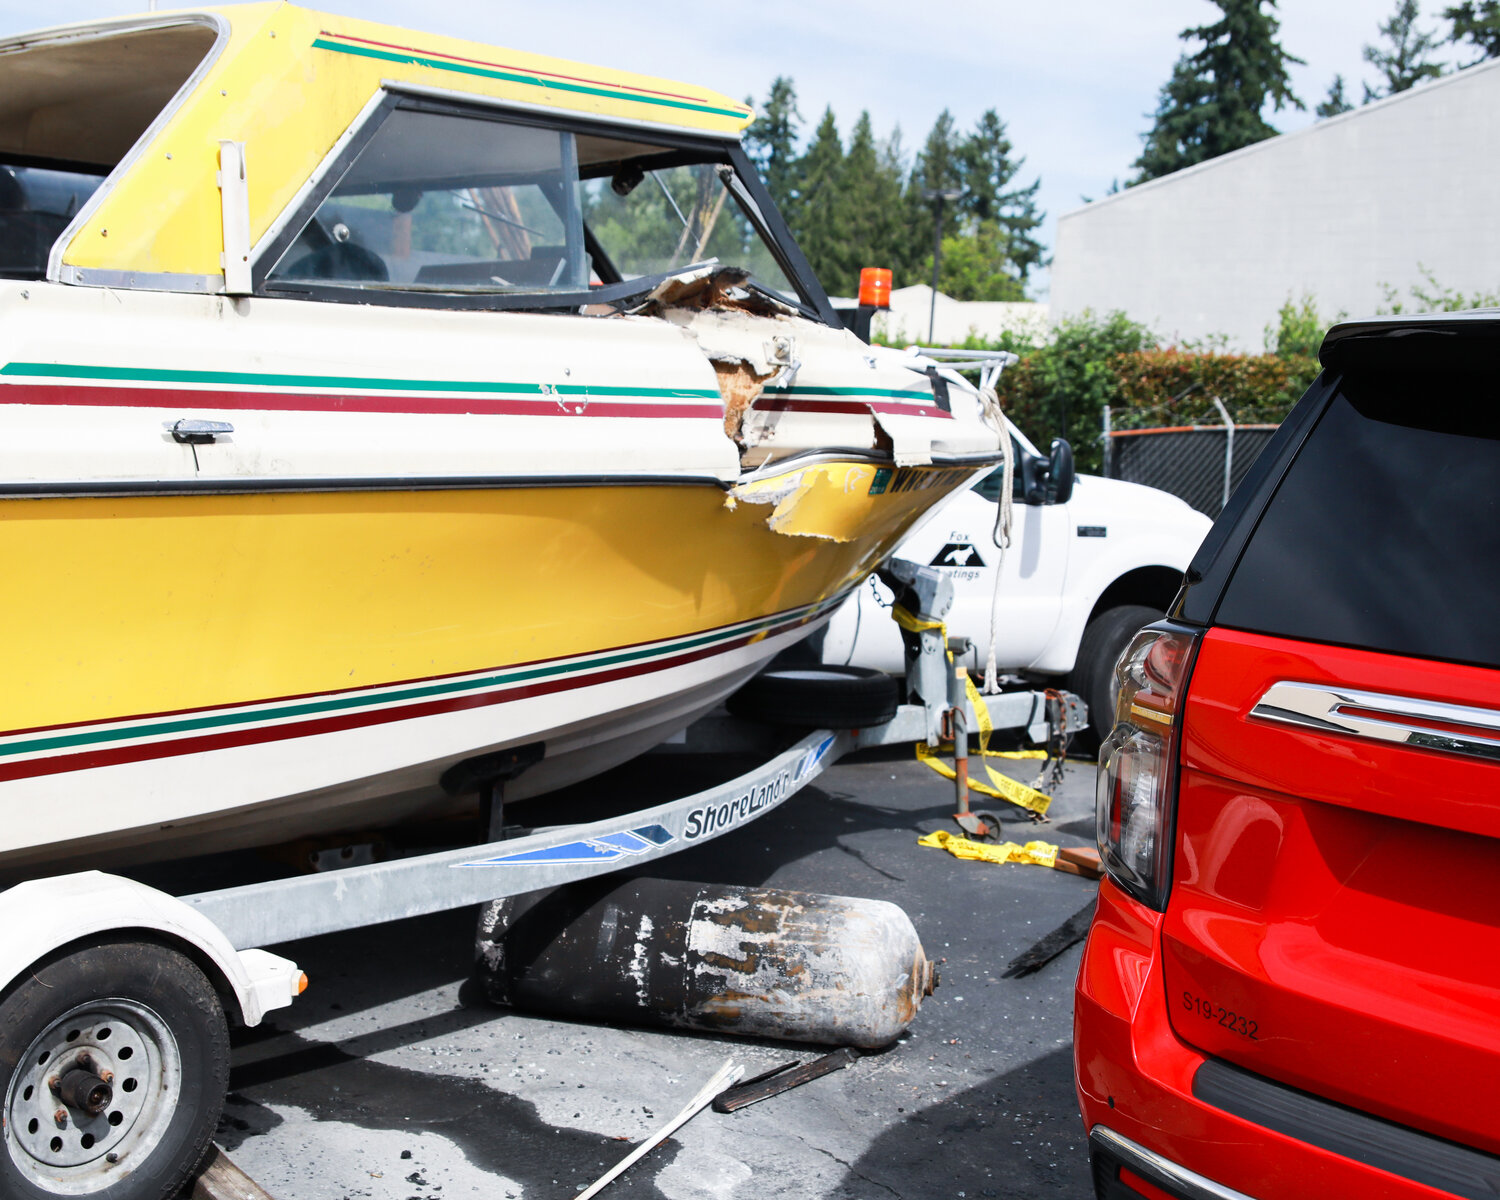 Canisters were sent flying during an industrial building fire that started on Tuesday, June 6, in Salmon Creek, damaging a boat.